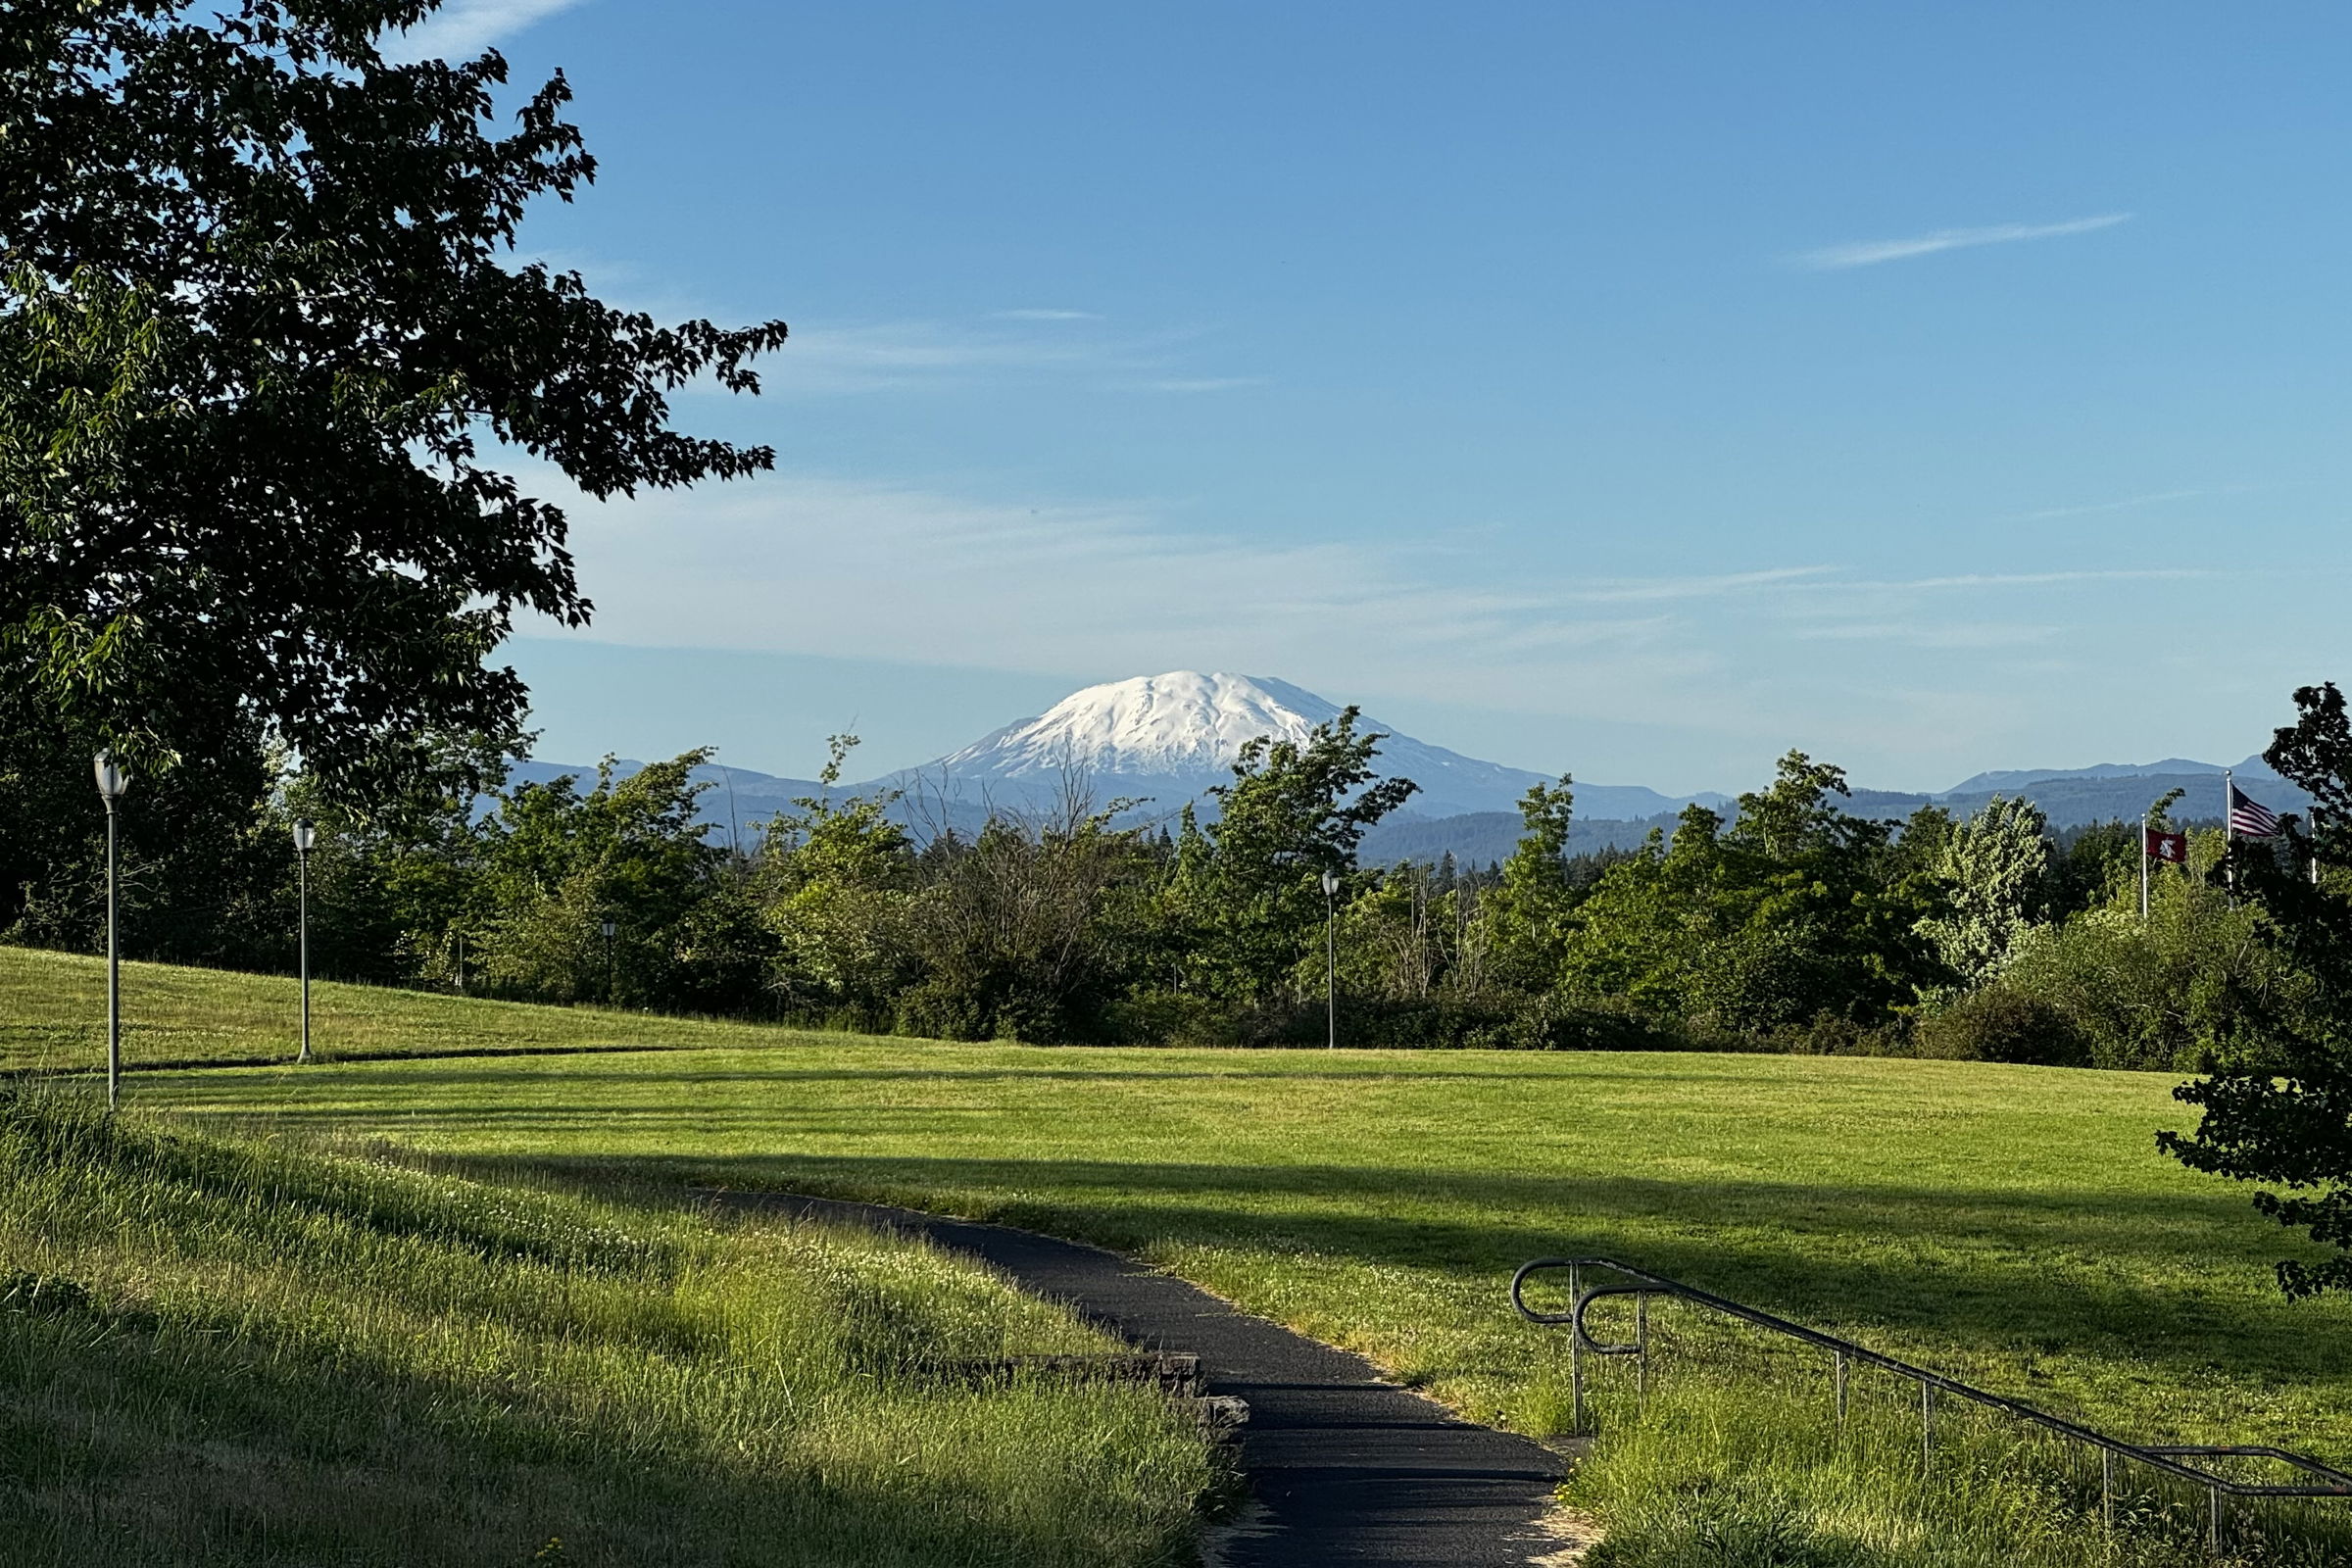 Snow-capped mountain in the distance under a clear blue sky, framed by lush green trees and a well-manicured park in the foreground with a winding path leading towards the mountain.